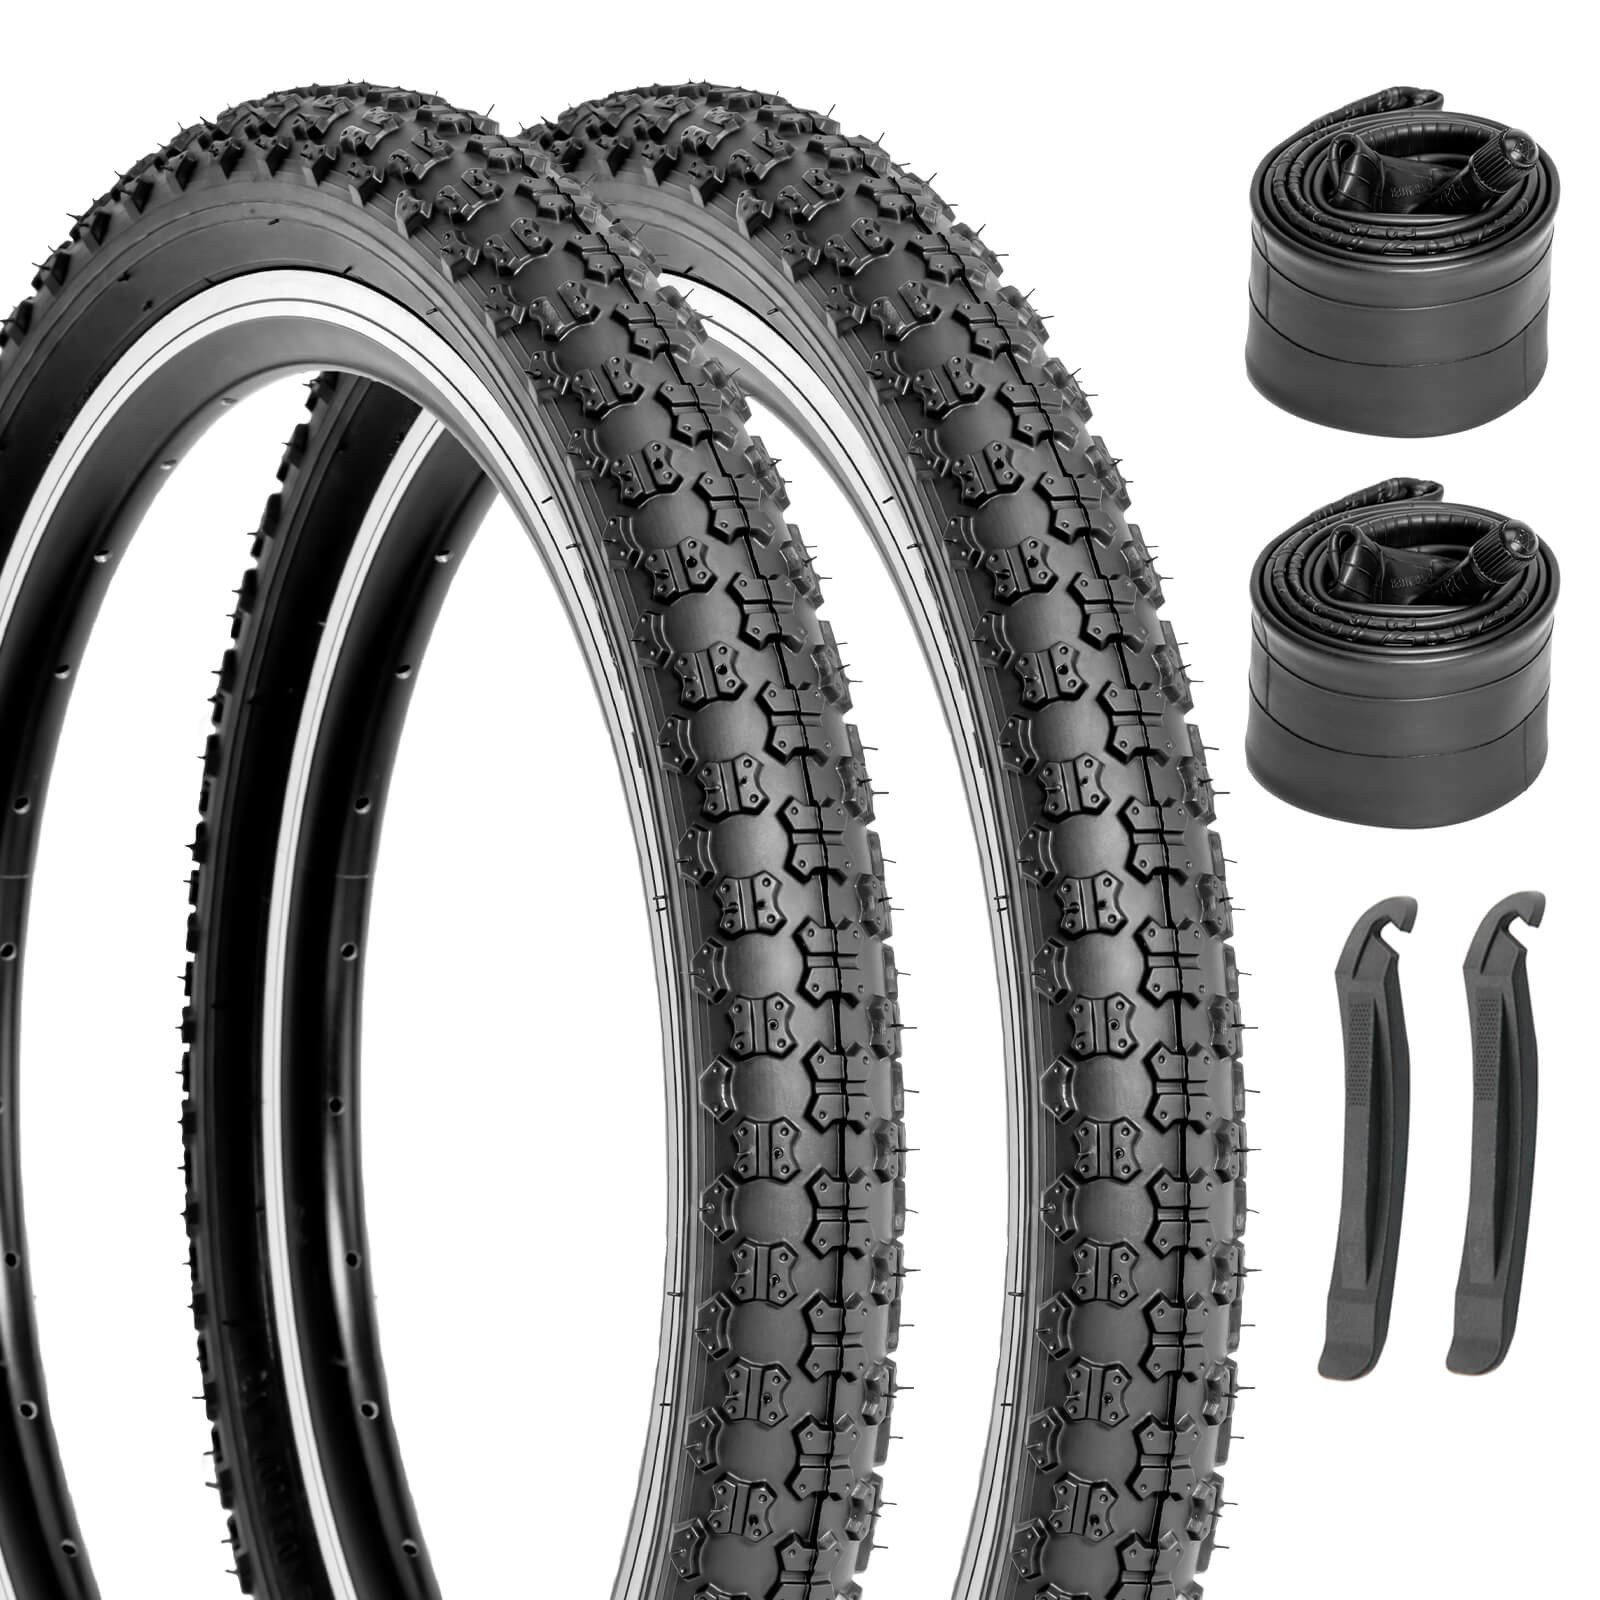 Hycline Bowlite 12.5"/14"/16"/20"×2.125 Childs Bike Tire with tube replacement set